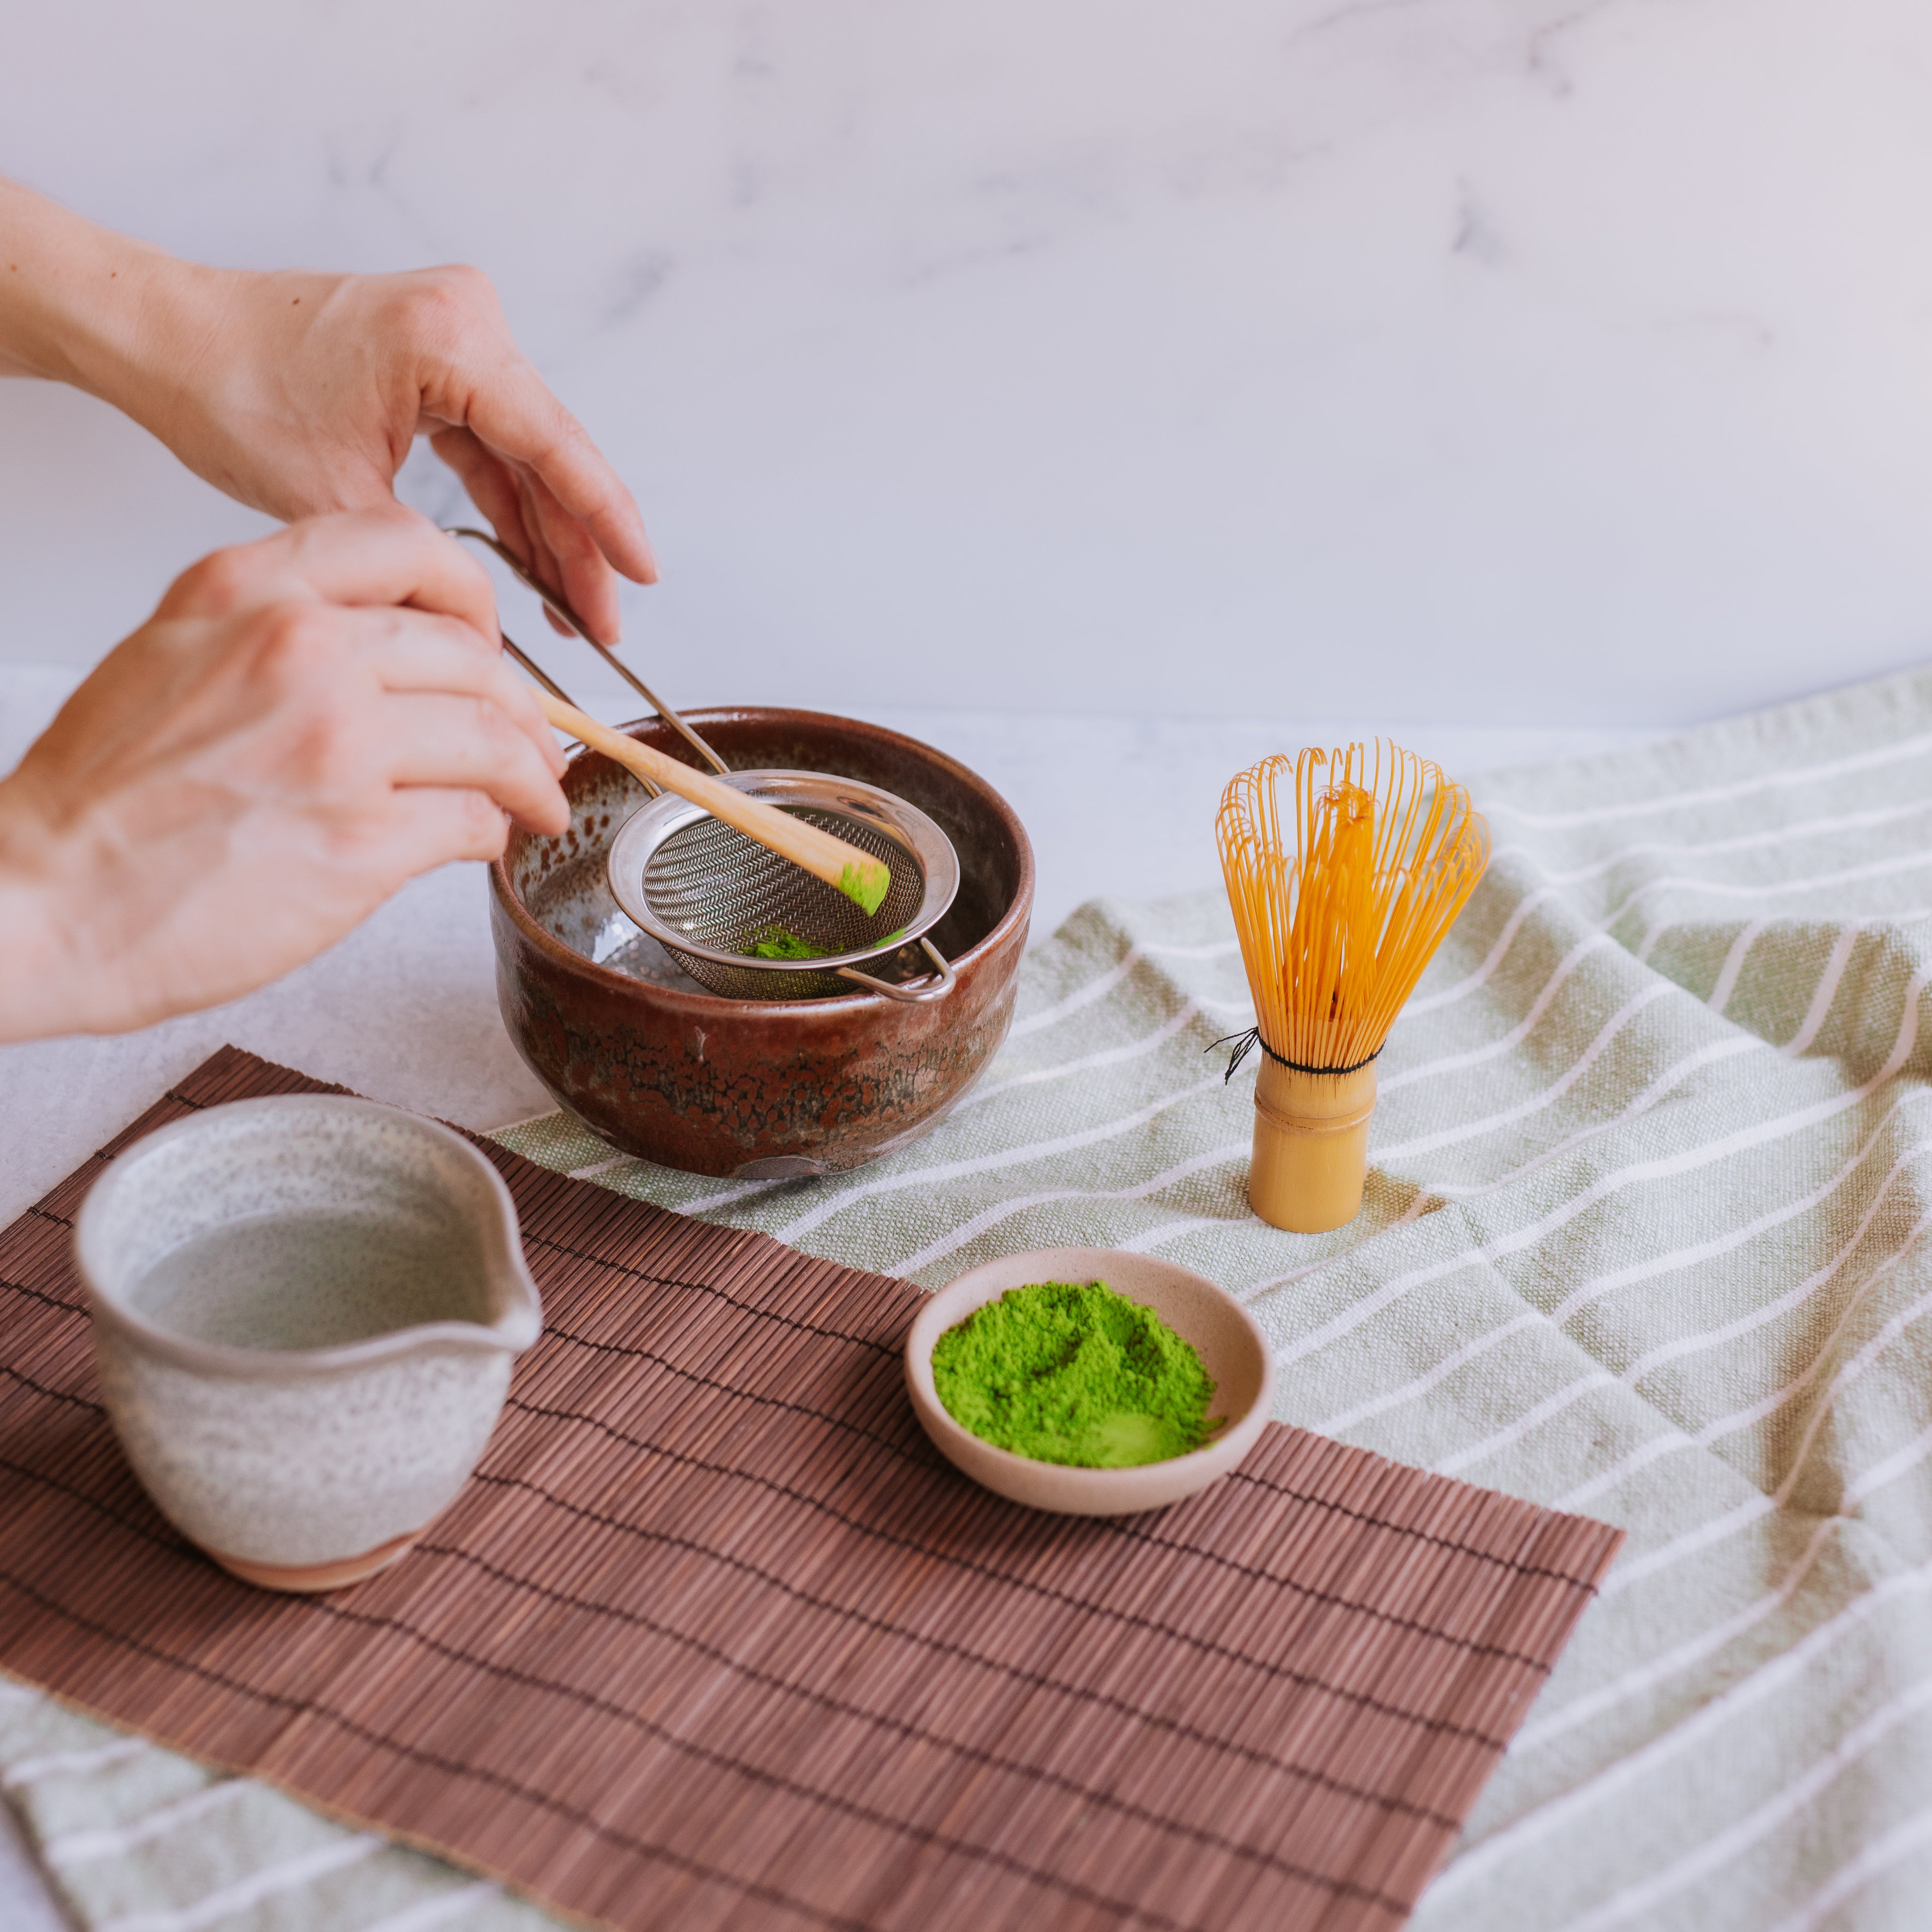 two hands measuring matcha into a matcha bowl with a bamboo scoop in preparation to make matcha